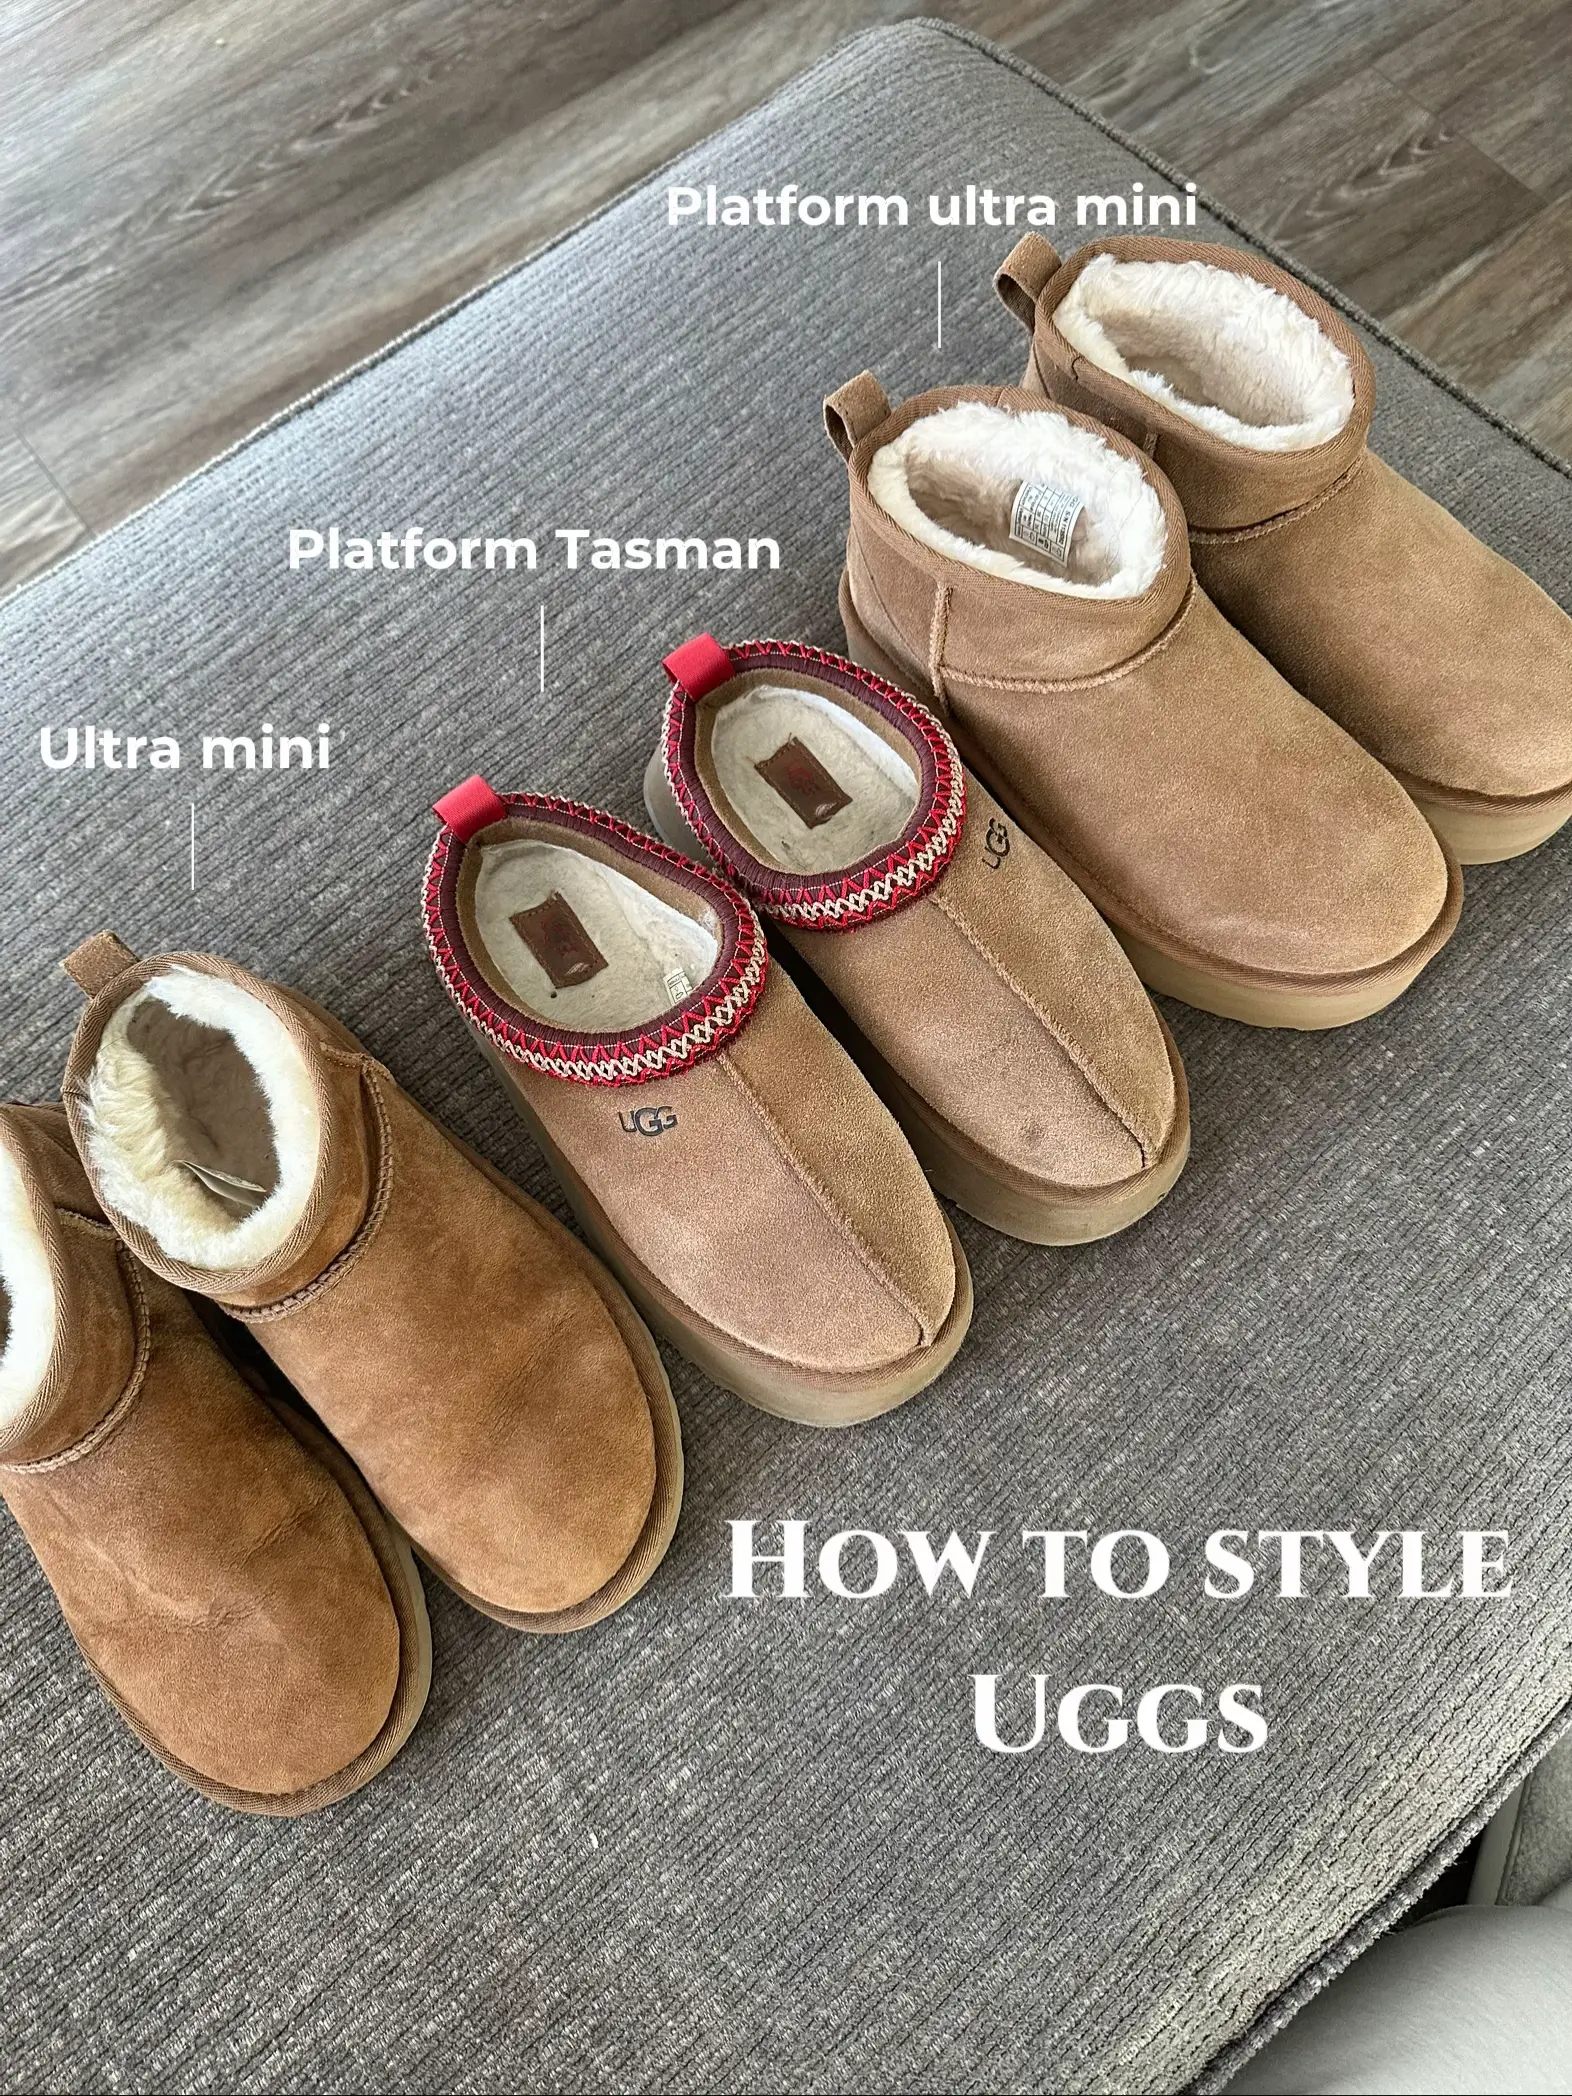 26 Cute Ugg Outfit Ideas & Tips How to Wear Uggs  Winter boots outfits, Uggs  outfit, Outfit with uggs